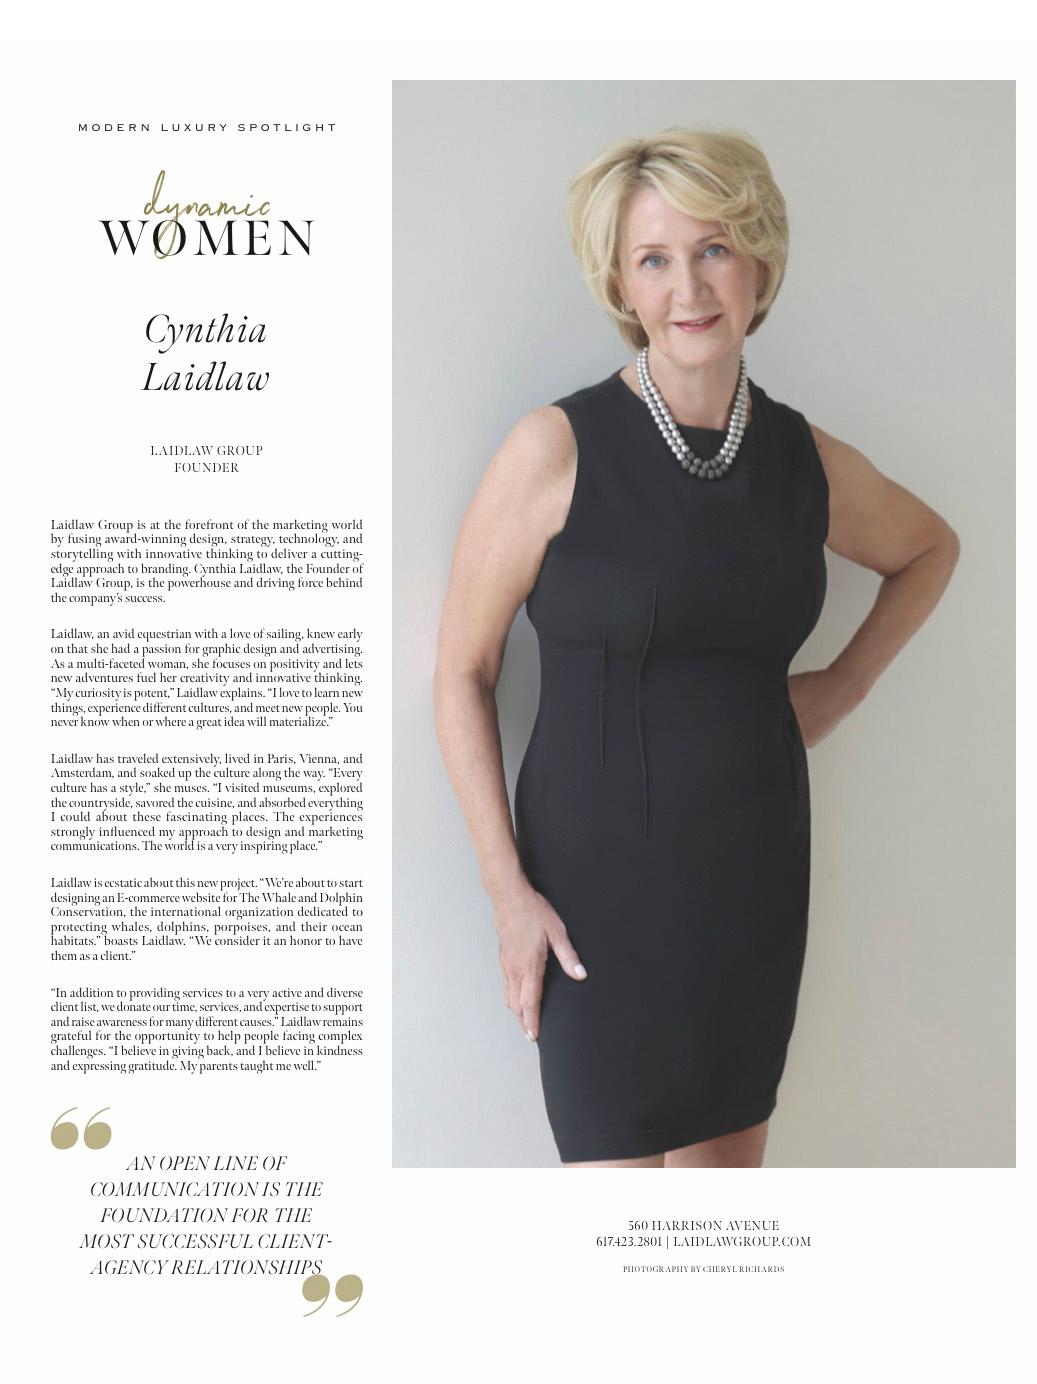 cindy laidlaw featured in boston common magazine